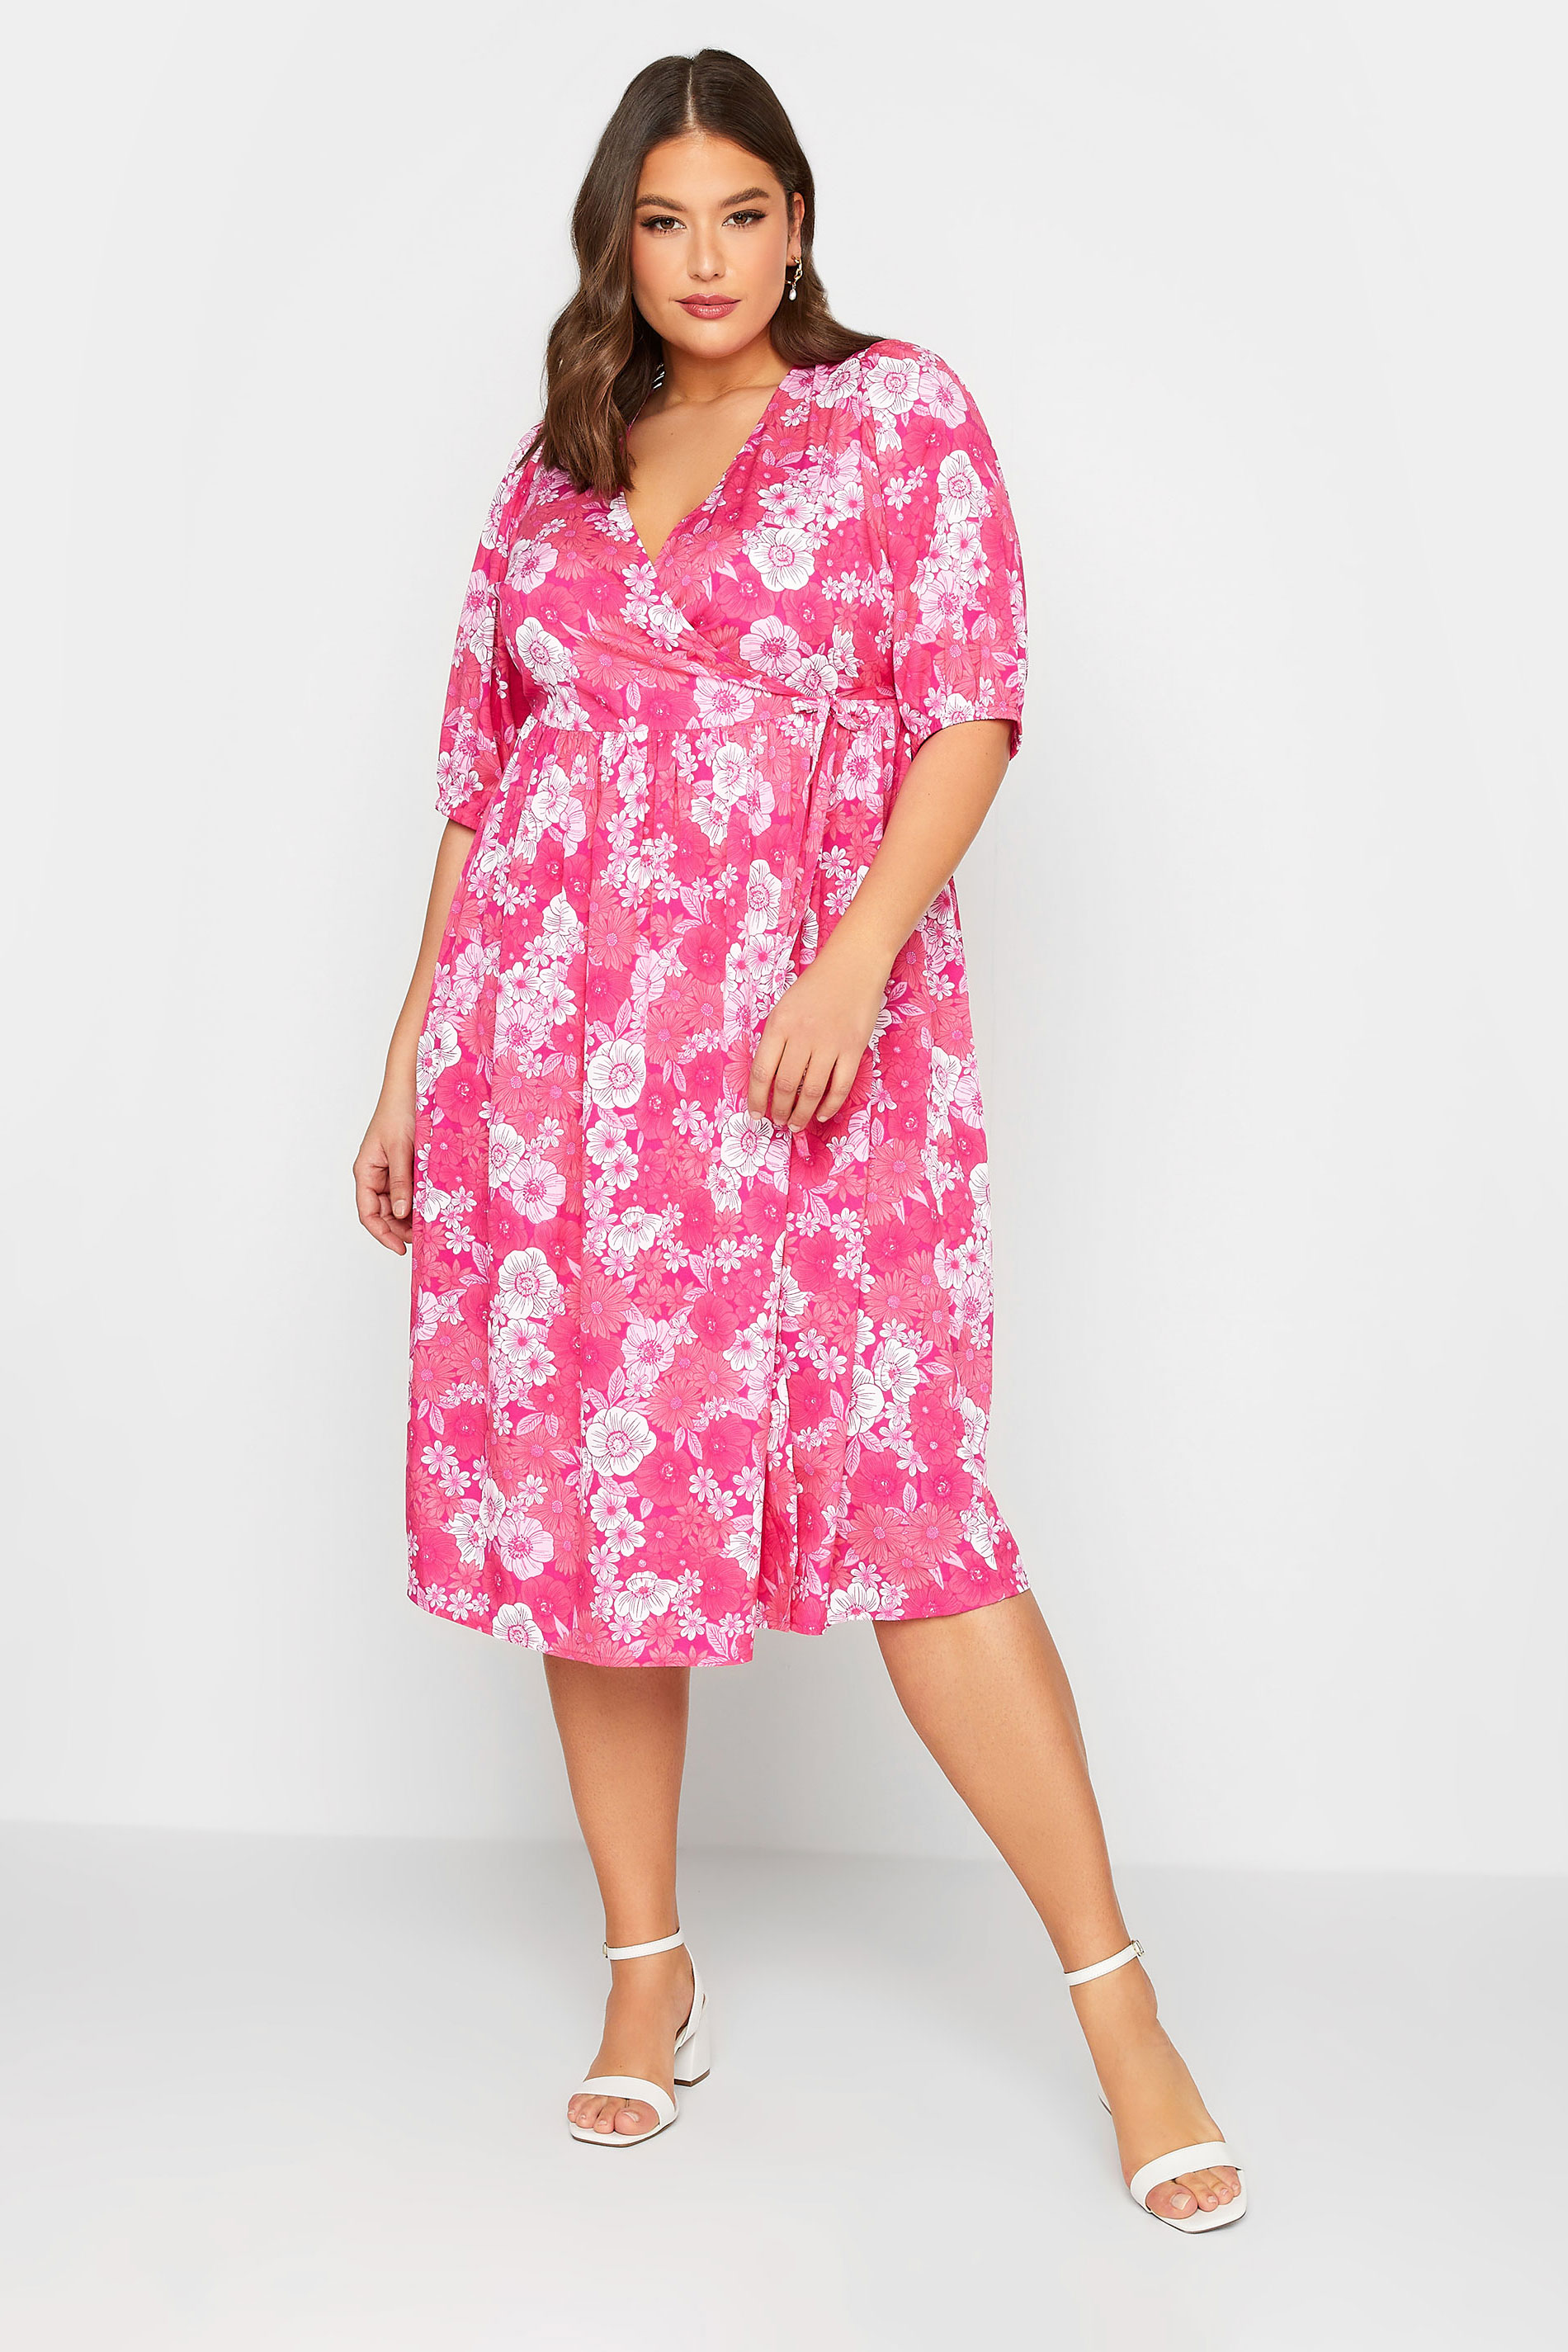 LIMITED COLLECTION Curve Plus Size Pink Floral Wrap Midaxi Dress | Yours Clothing  3